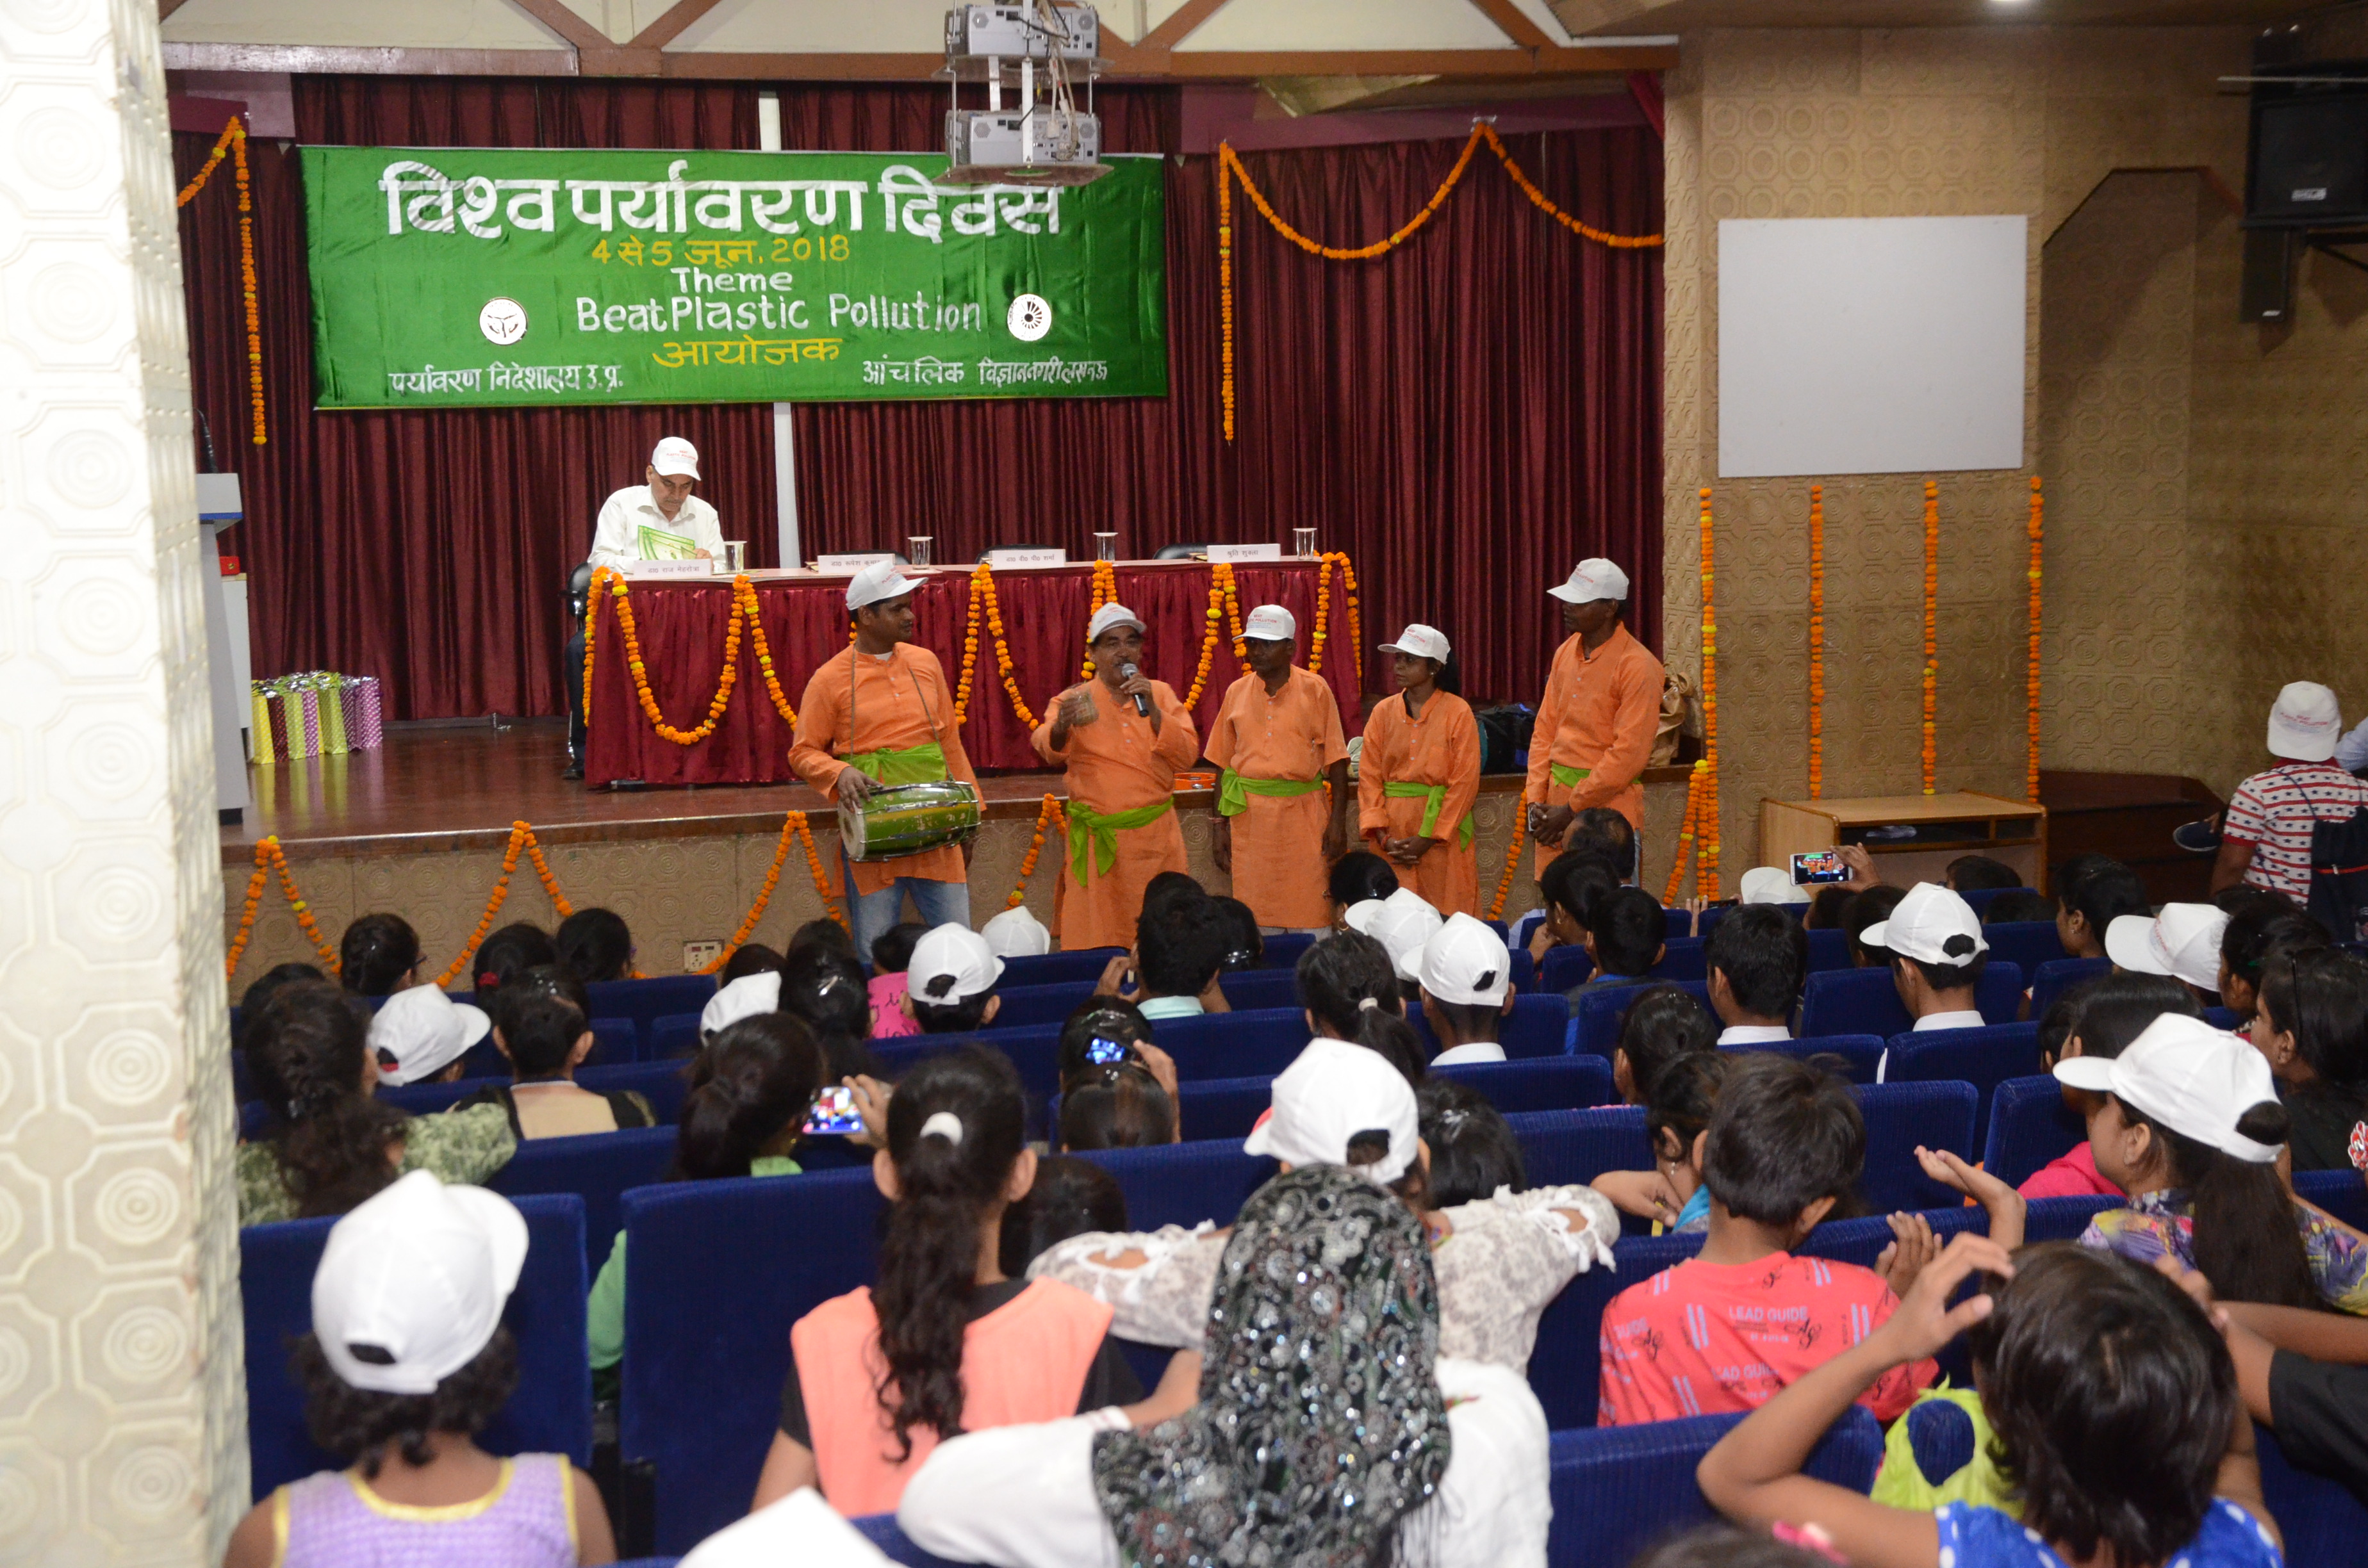 World Environment Day 2018 Celebration at Regional Science City, Lucknow